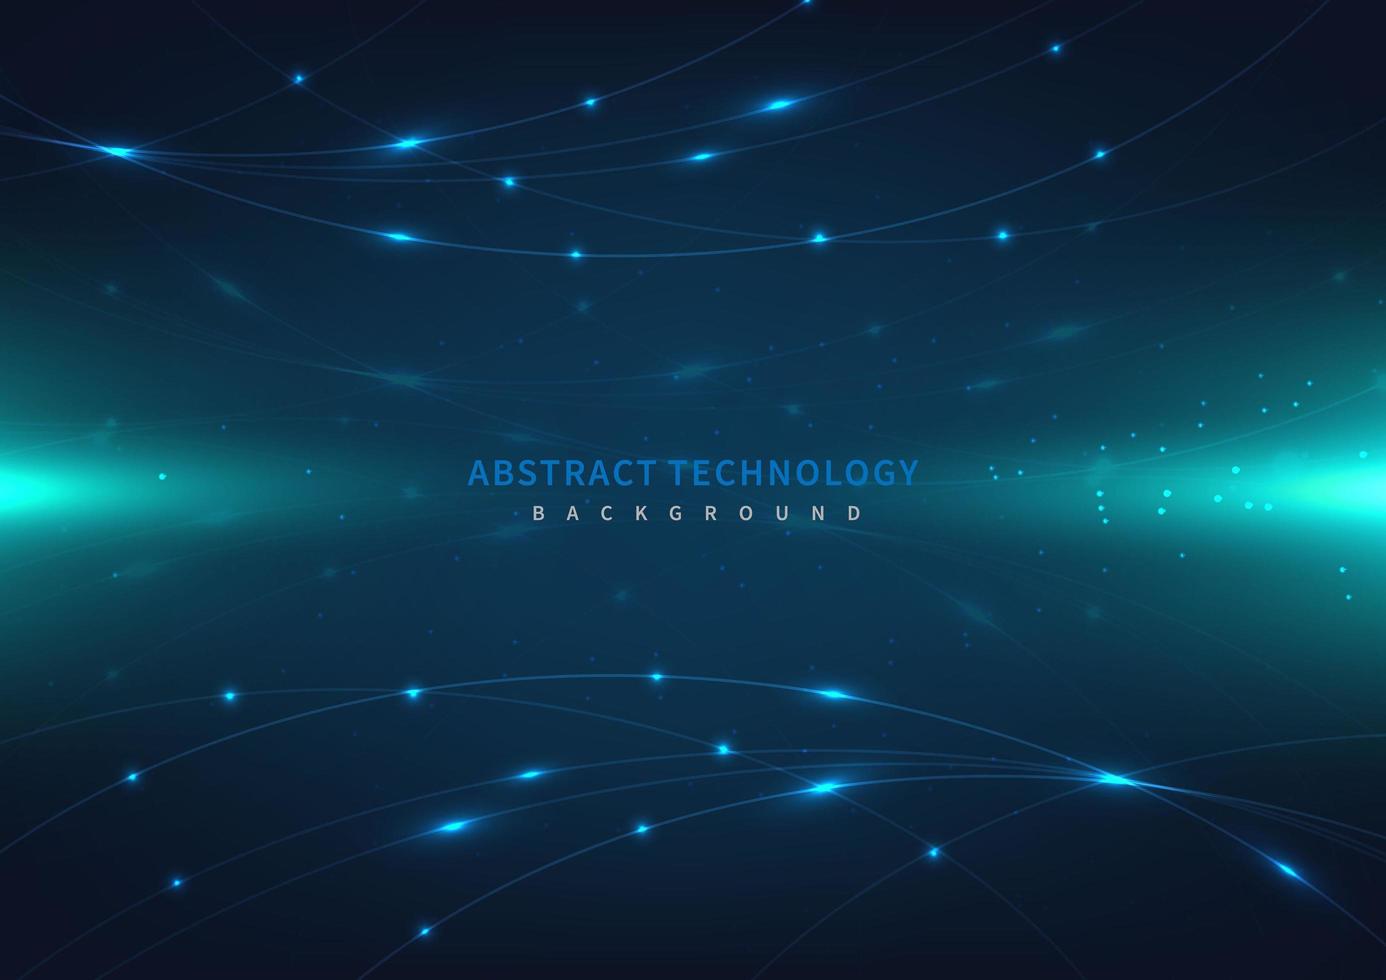 Abstract technology futuristic digital concept laser curved lines pattern with lighting glowing particles on dark blue background. vector